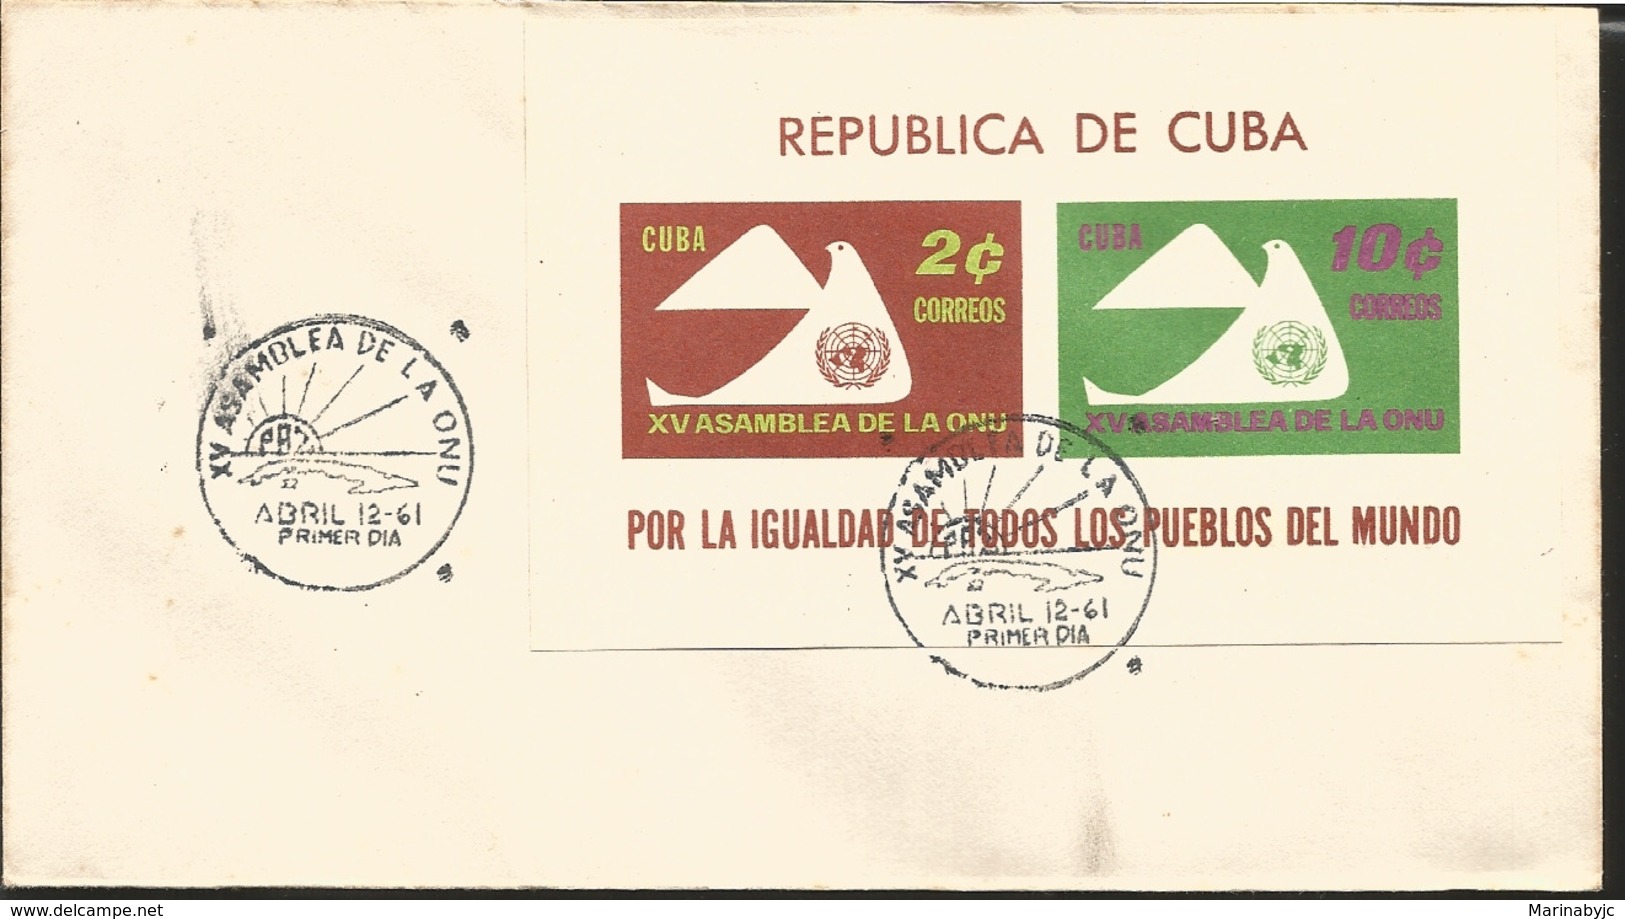 V) 1961 CARIBBEAN, 15TH ANNIVERSARY OF THE UN, BLACK CANCELLATION, SOUVENIR SHEET IMPERFORATE, FDC - Covers & Documents